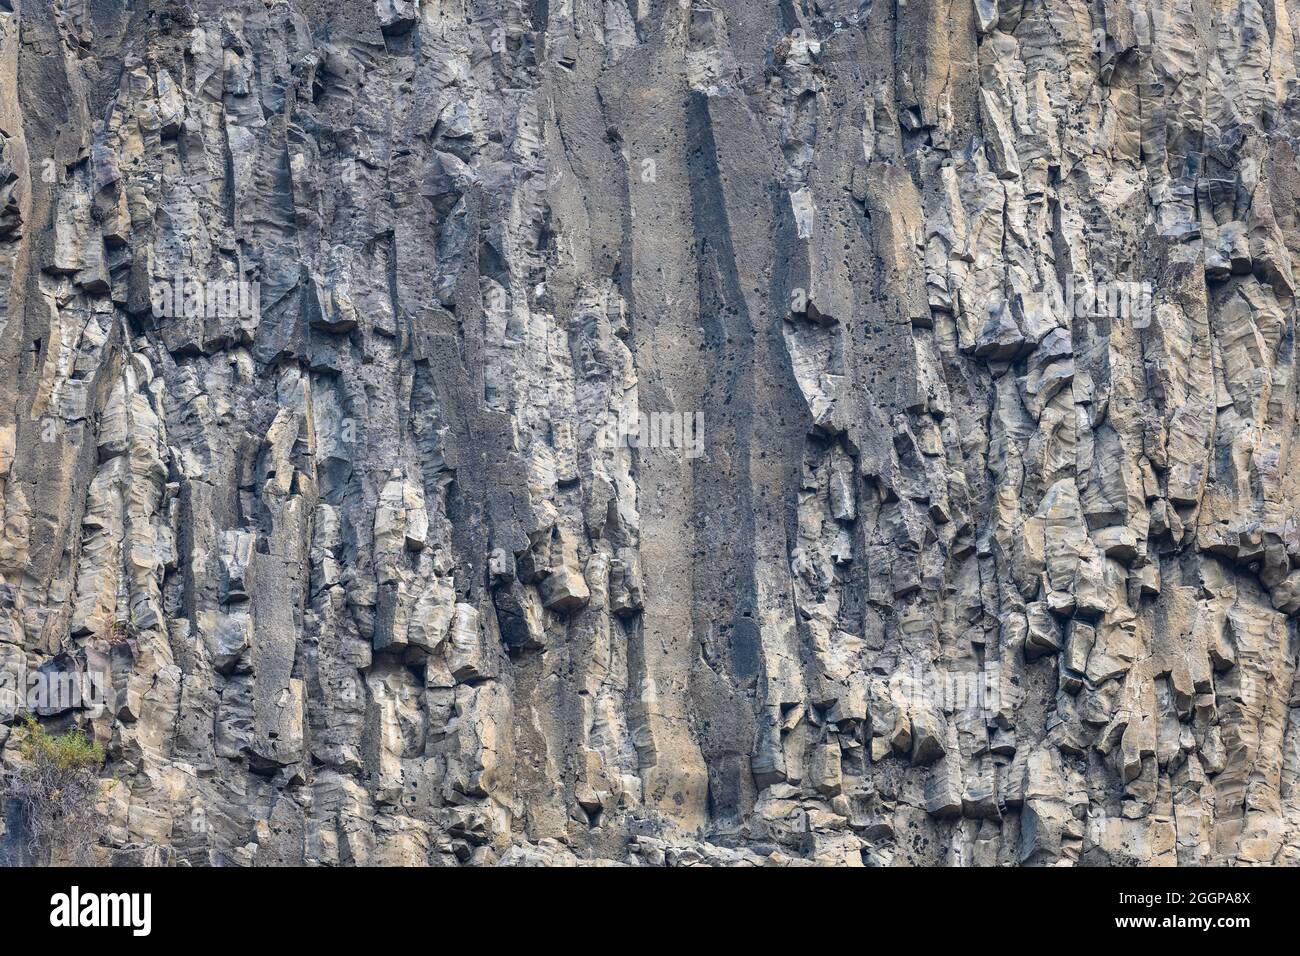 Thick baslat layers with columnar joints. Oregon, USA. Stock Photo